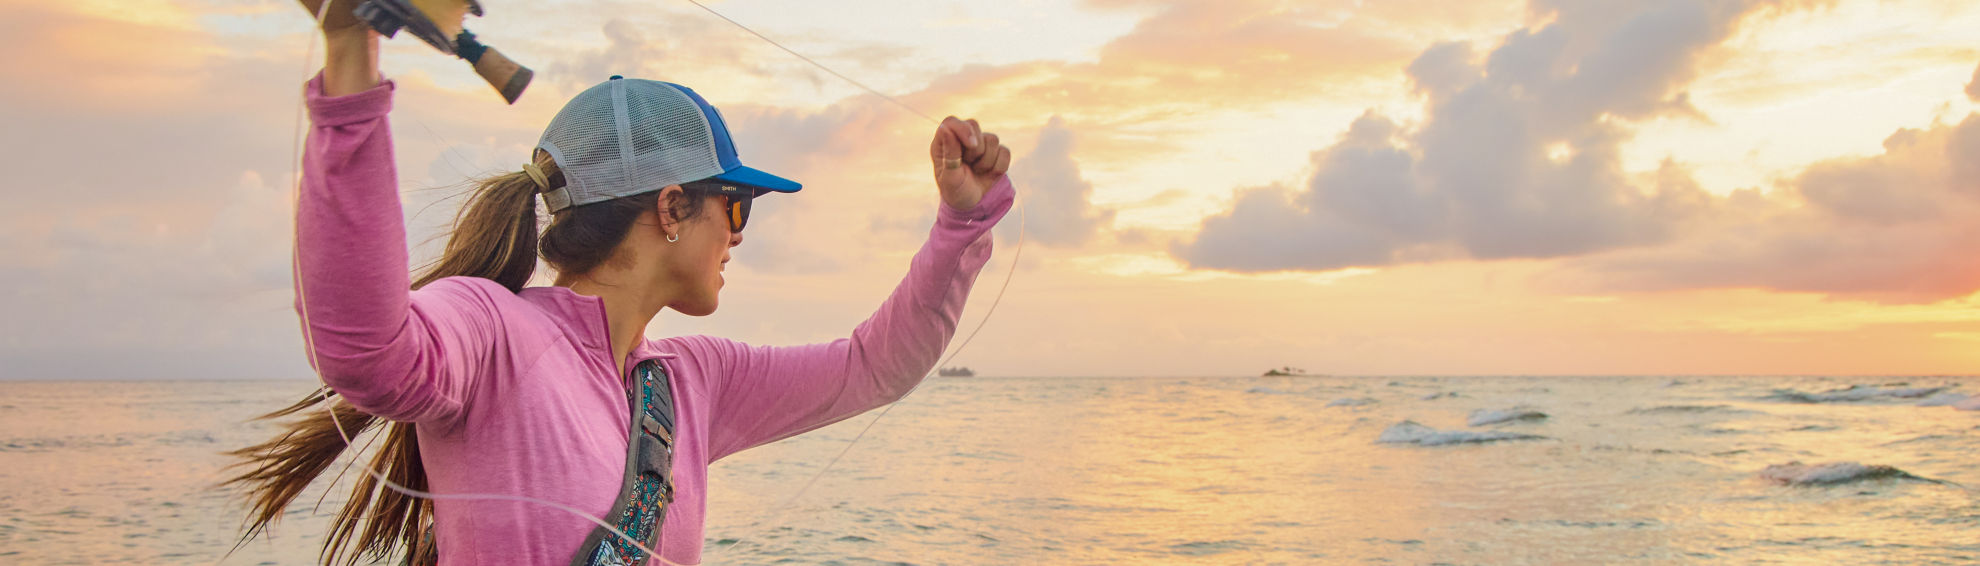 An angler casts her rod as the sun rises over the ocean.